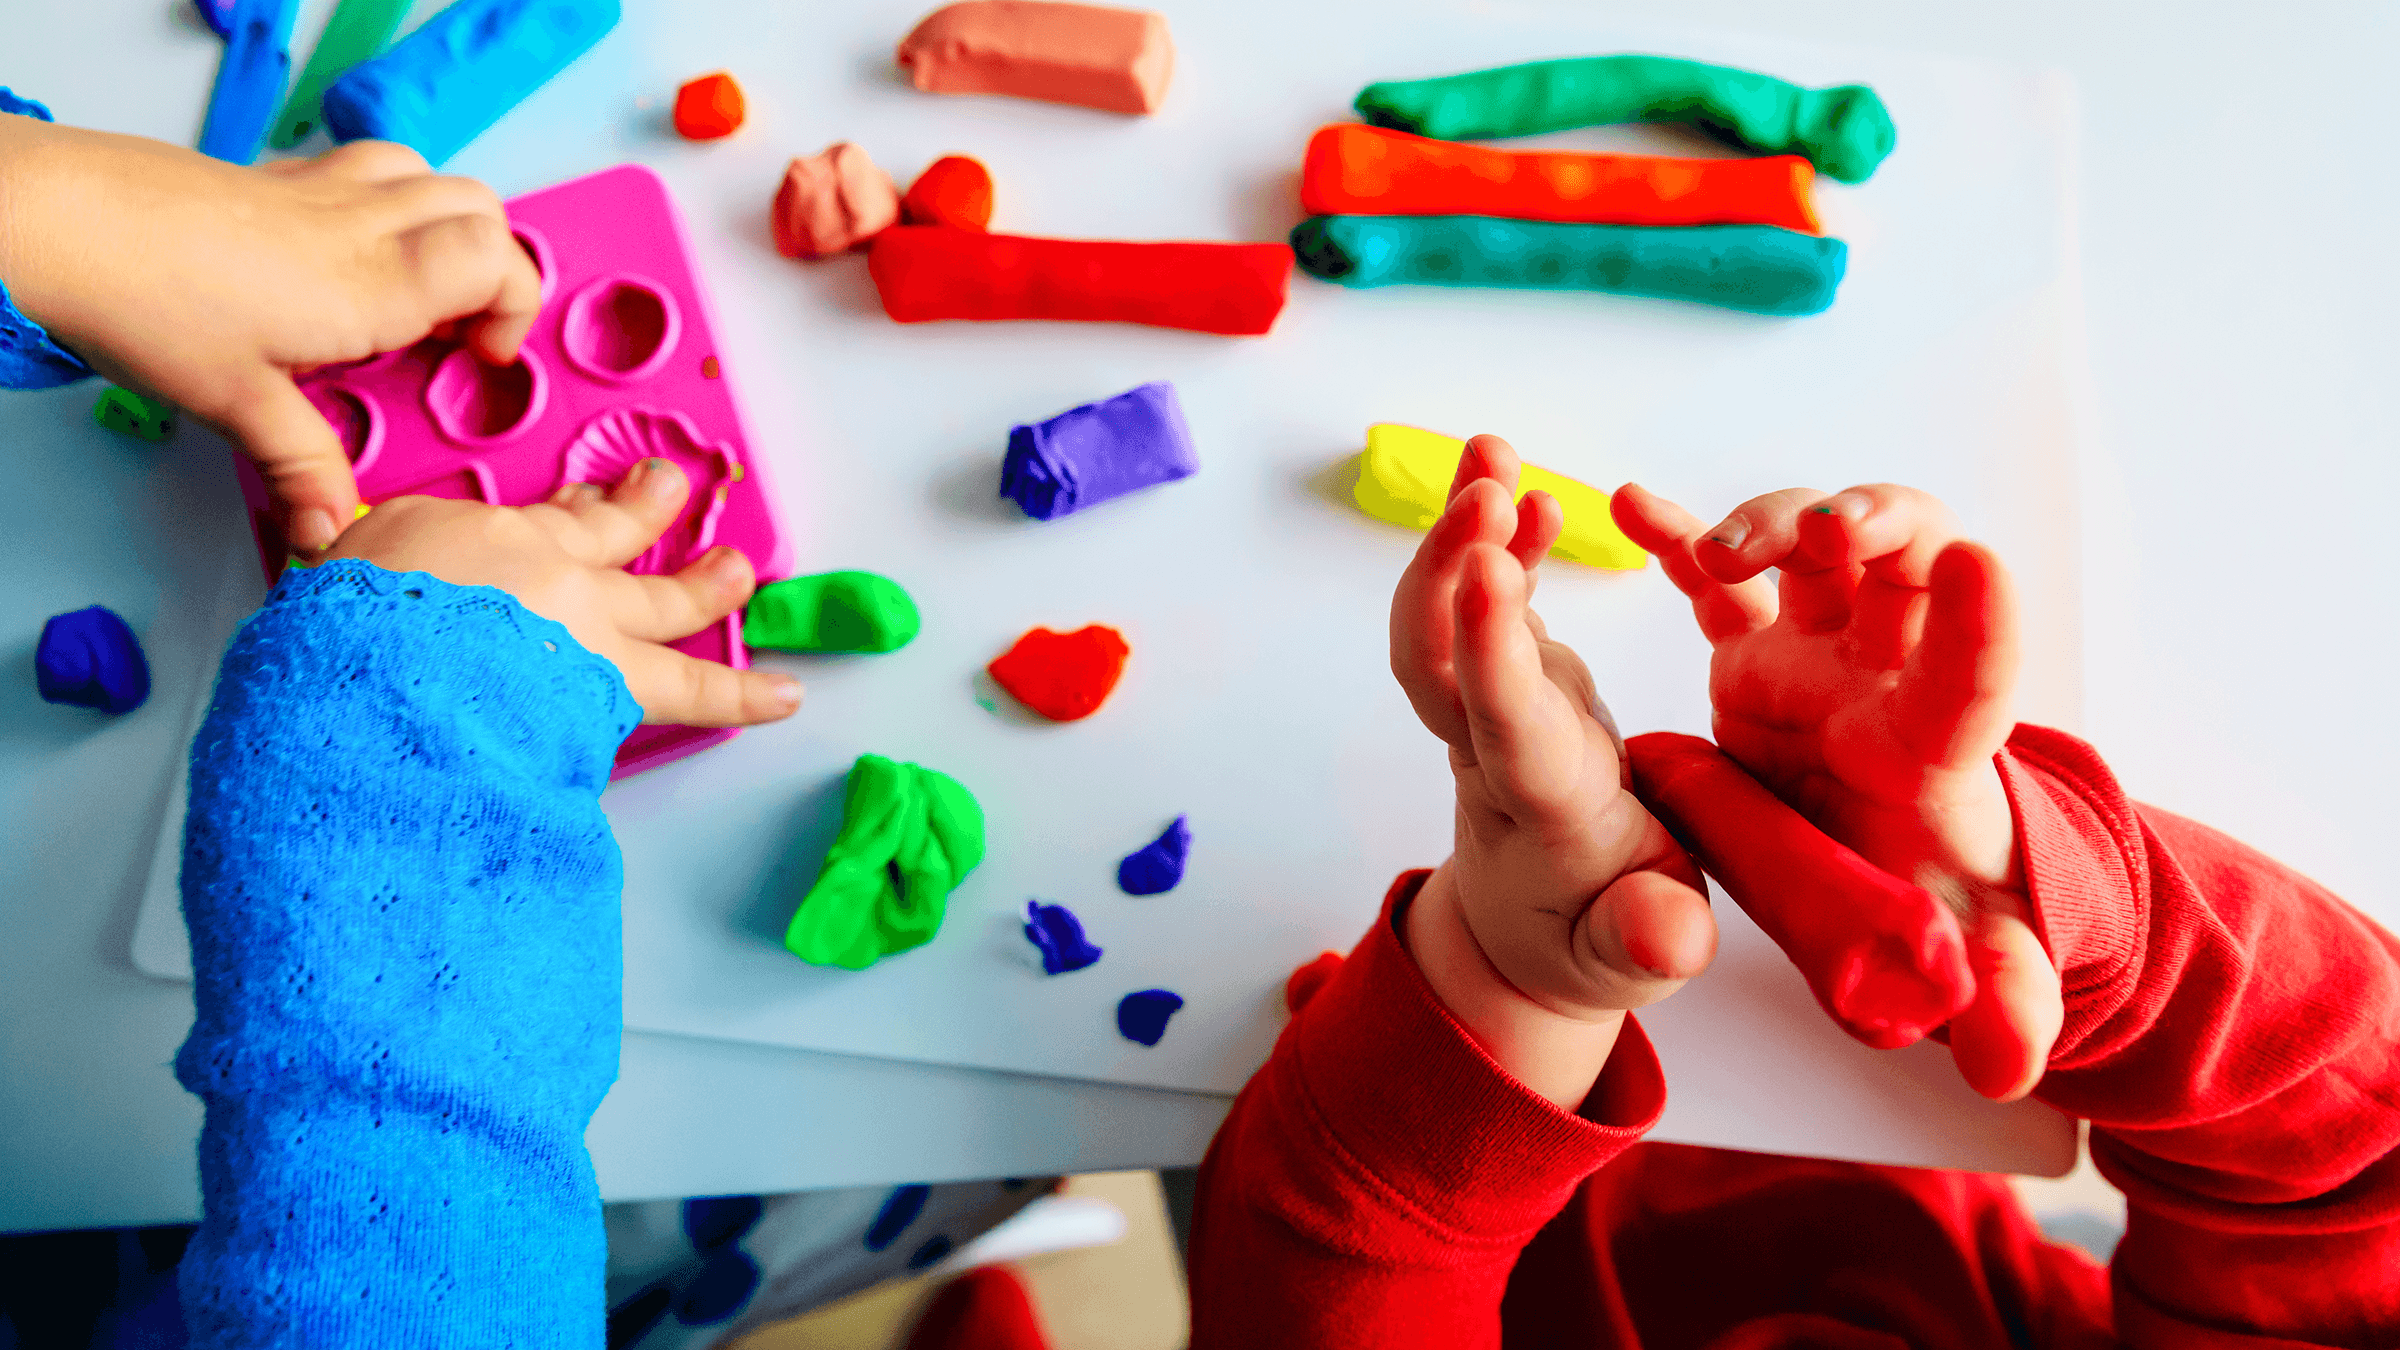 It takes an employer: how addressing childcare can unlock diverse talent pipelines